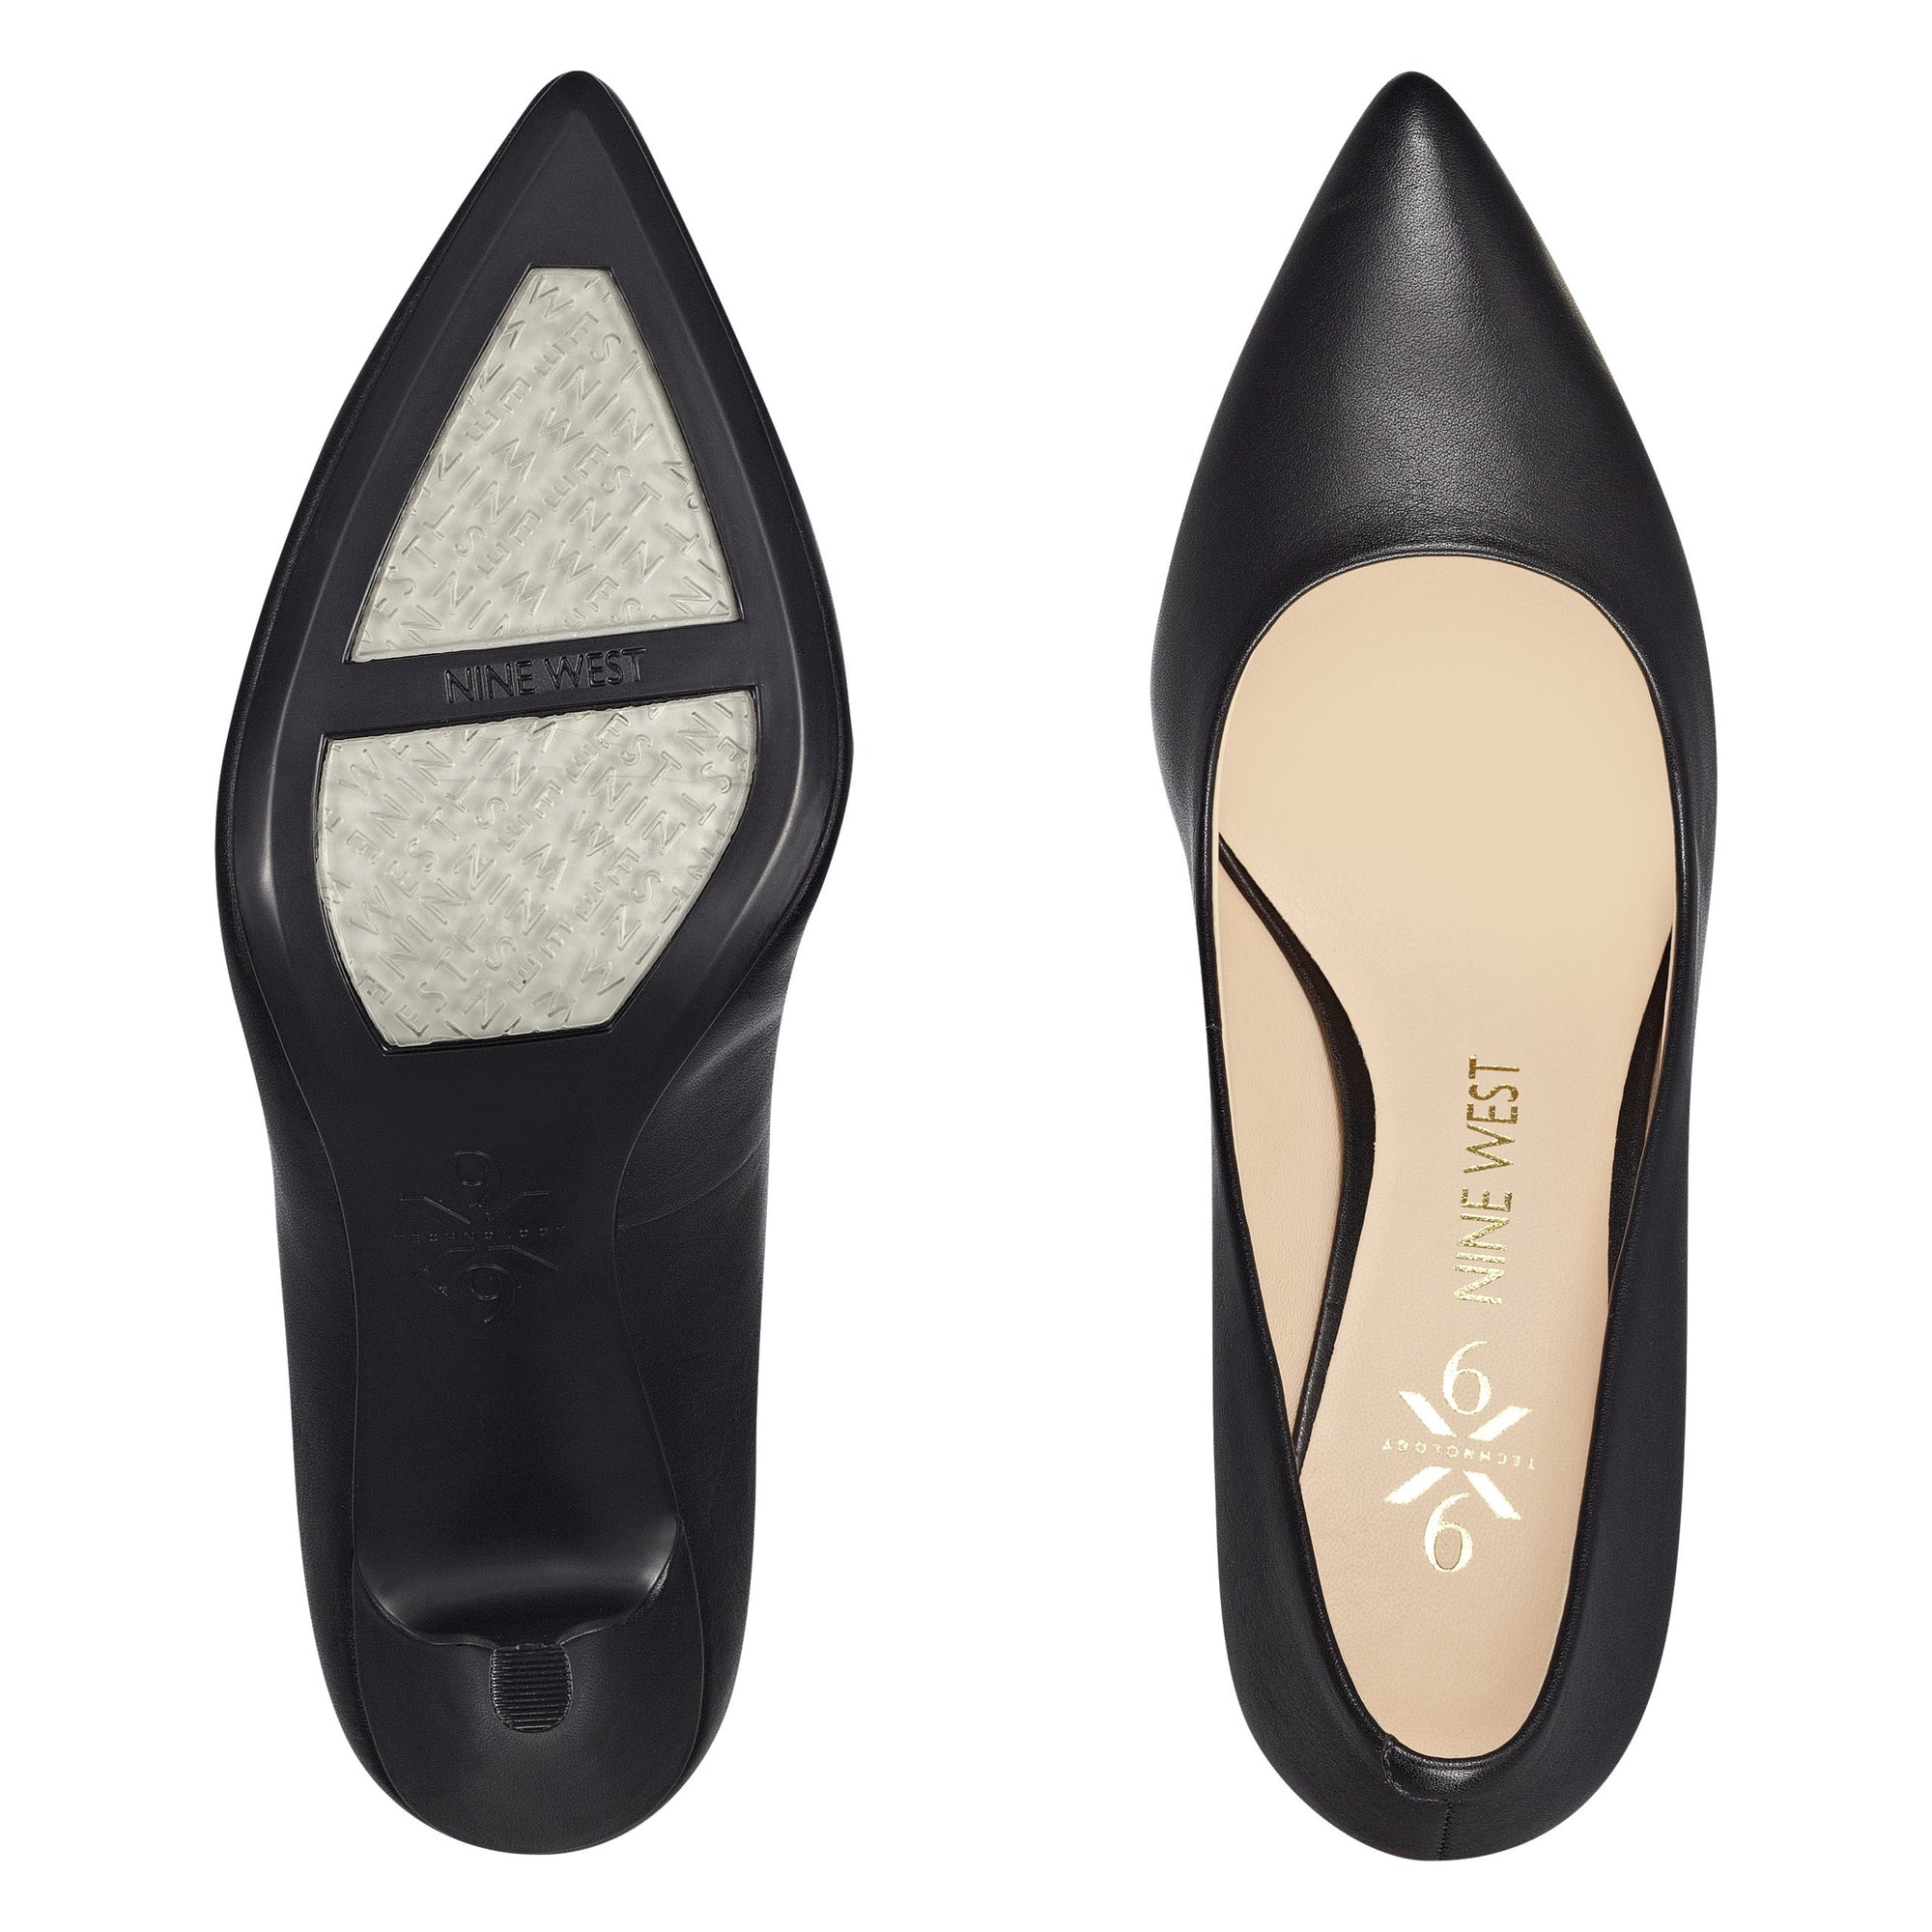 Fifth 9x9 Pointy Toe Pumps - Nine West